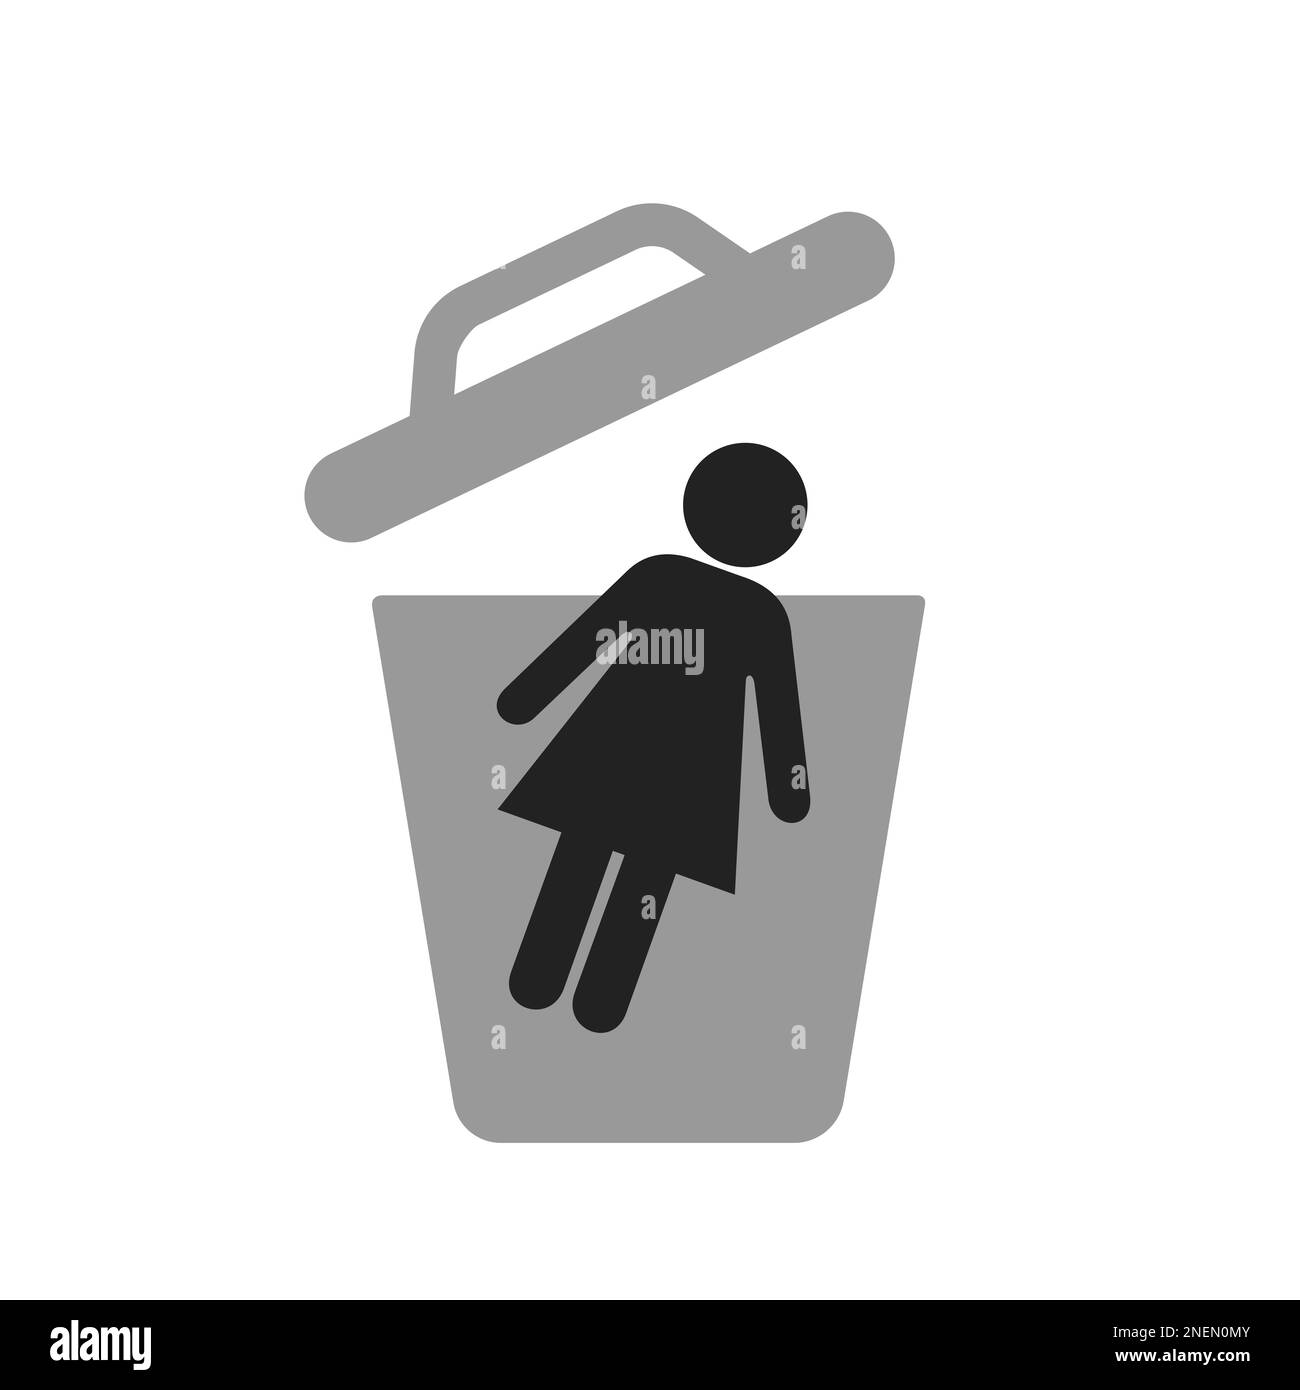 Leftover woman - metaphor of unwanted single unmarried female. Marital status. Vector illustration isolated on white. Stock Photo